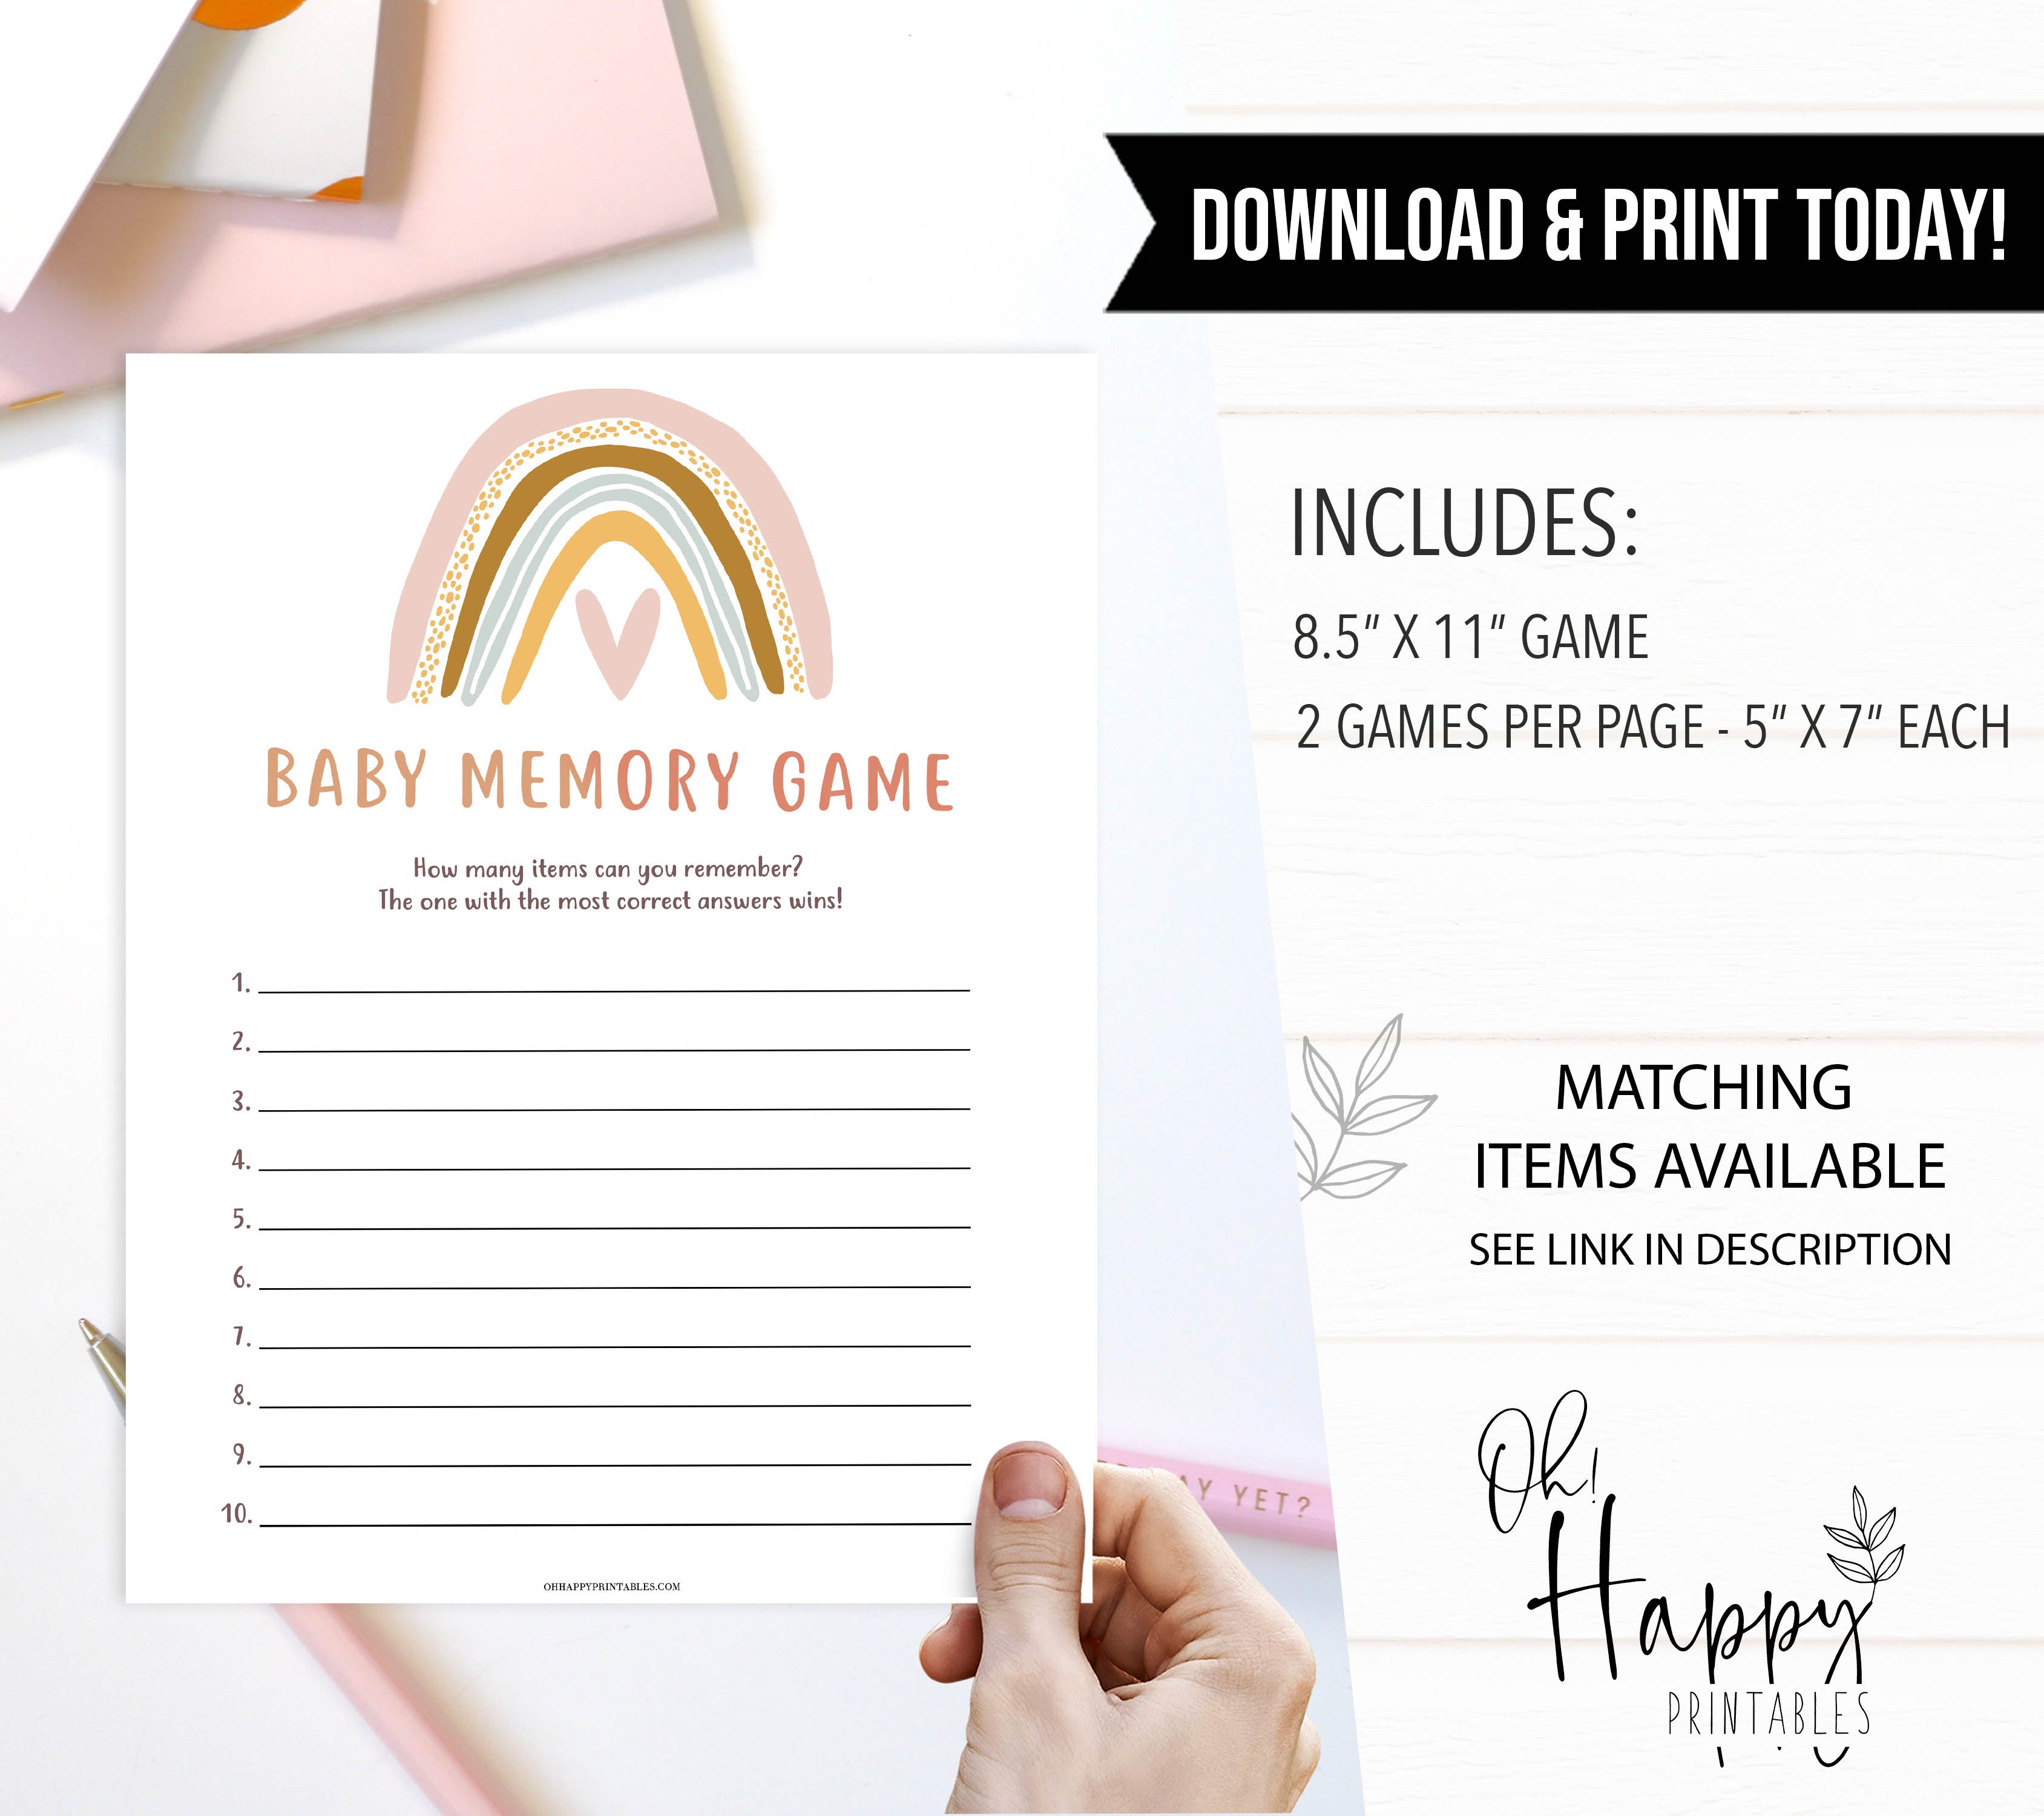 baby memory game, Printable baby shower games, boho rainbow baby games, baby shower games, fun baby shower ideas, top baby shower ideas, boho rainbow baby shower, baby shower games, fun boho rainbow baby shower ideas